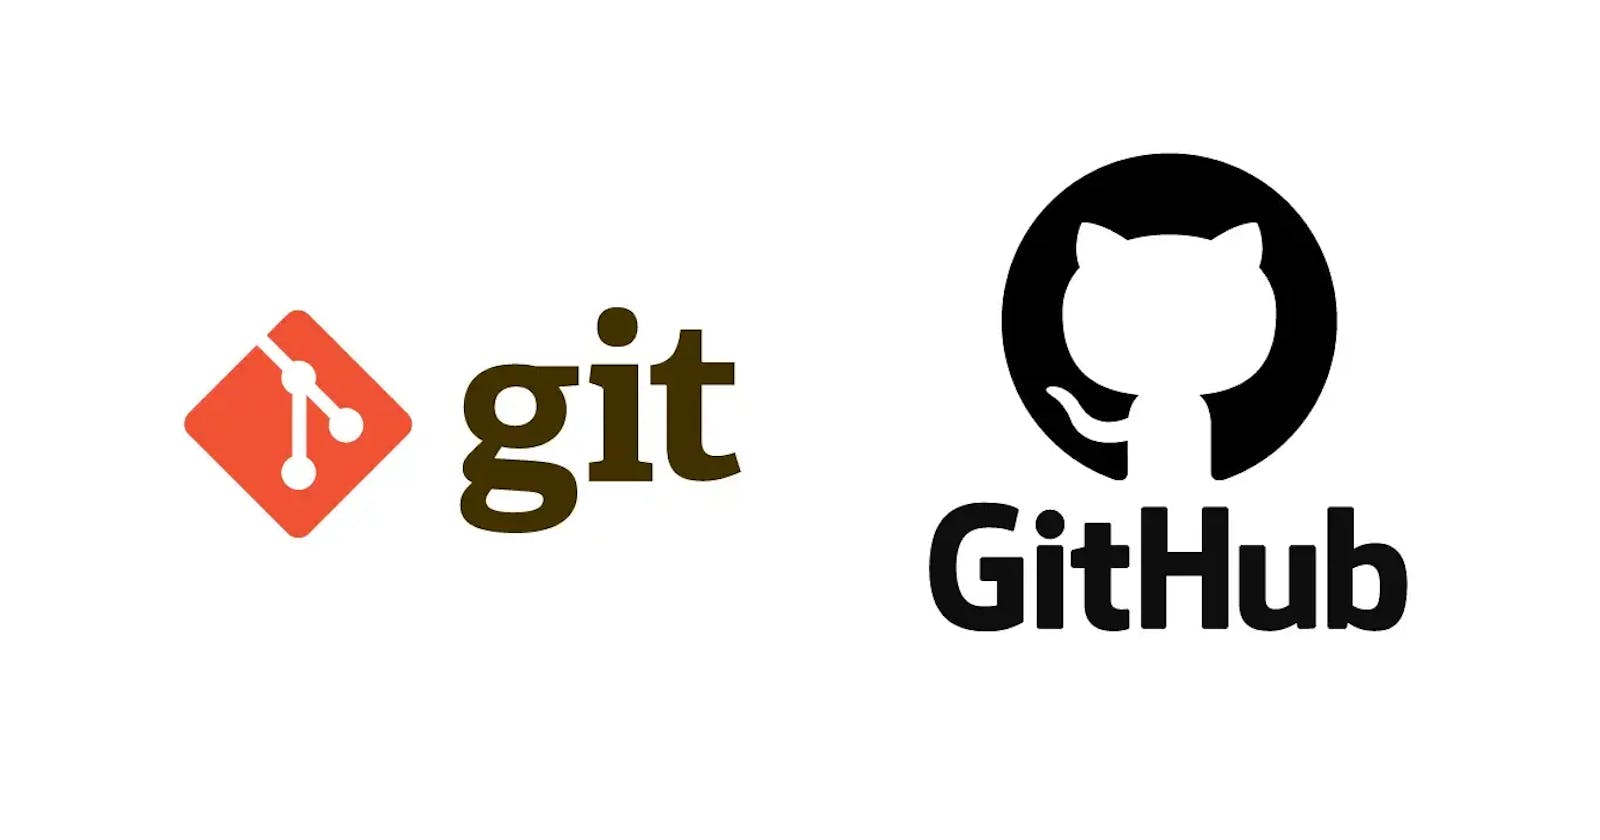 Beginners guide to Git and GitHub